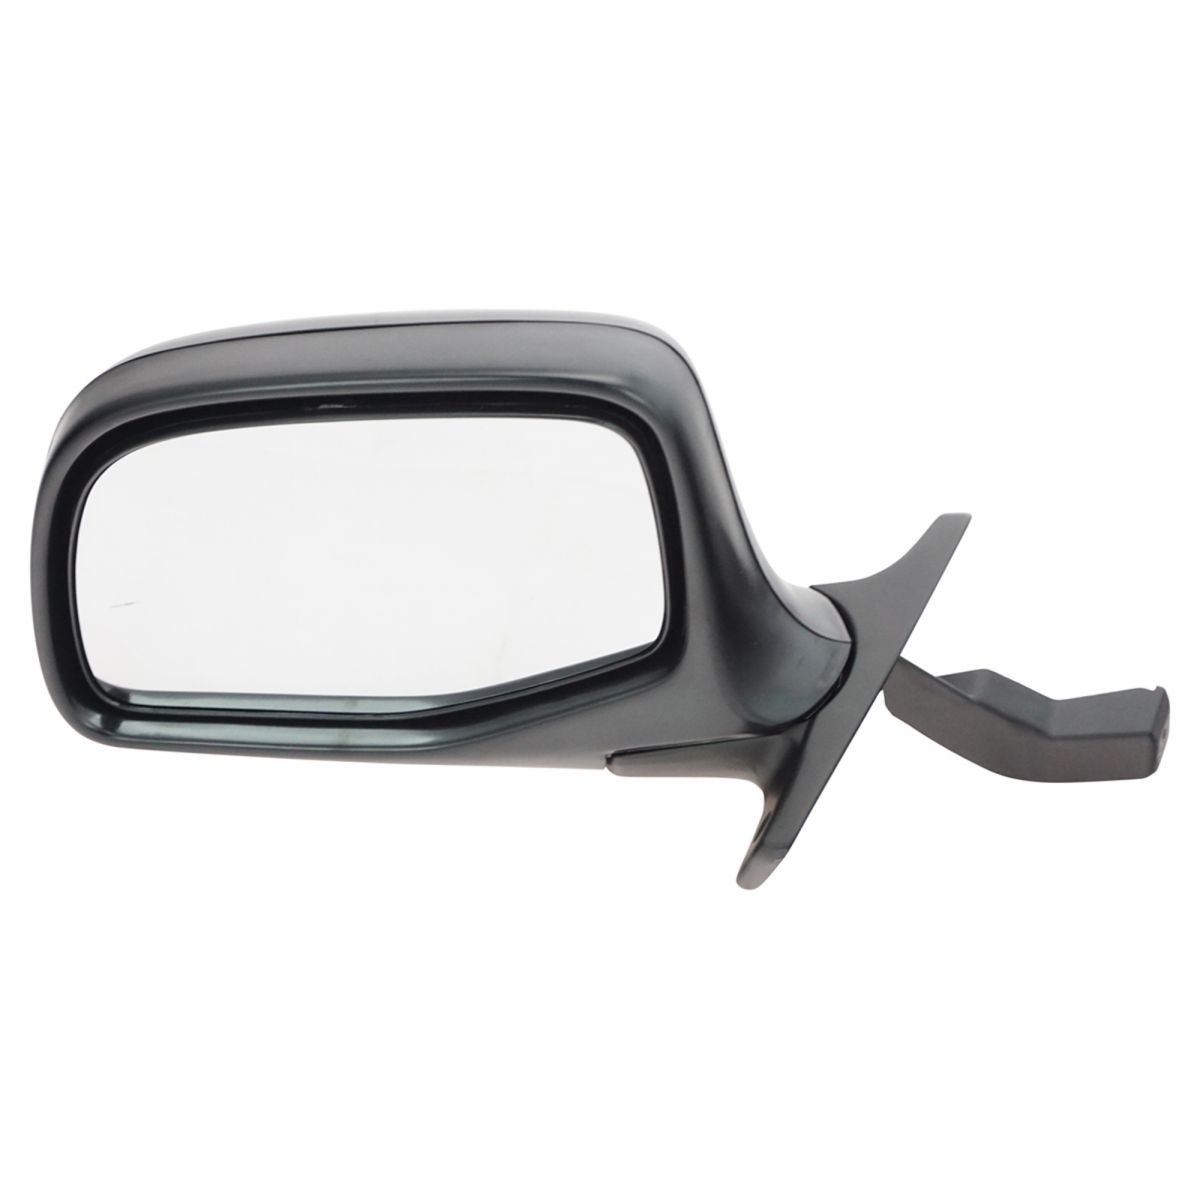 Details About Chrome Manual Side View Door Mirror Driver Left Lh For Ford Pickup Truck Bronco